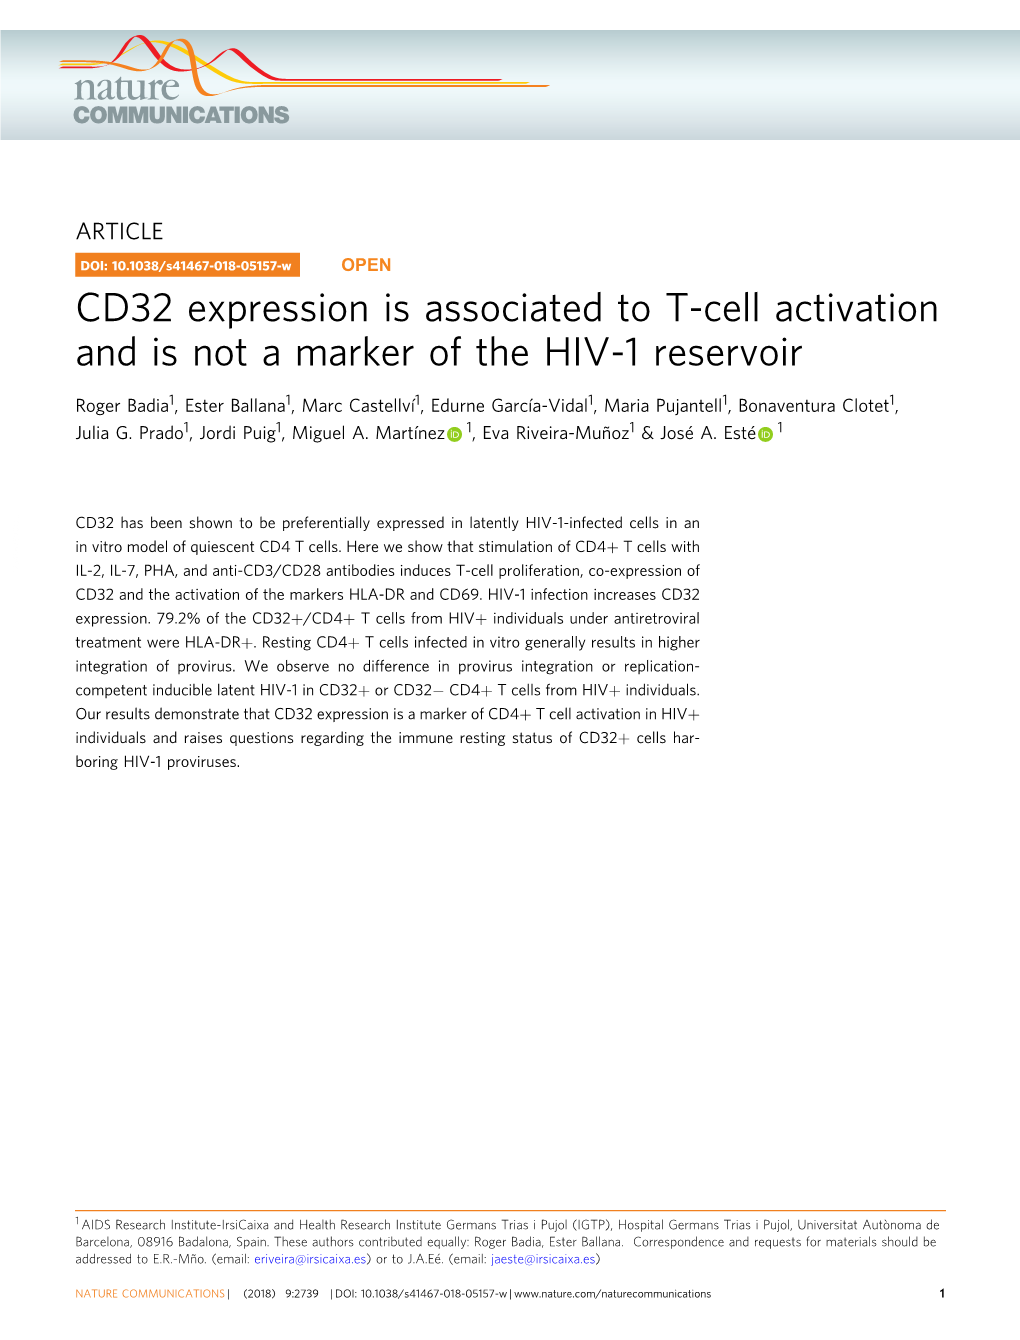 CD32 Expression Is Associated to T-Cell Activation and Is Not a Marker of the HIV-1 Reservoir